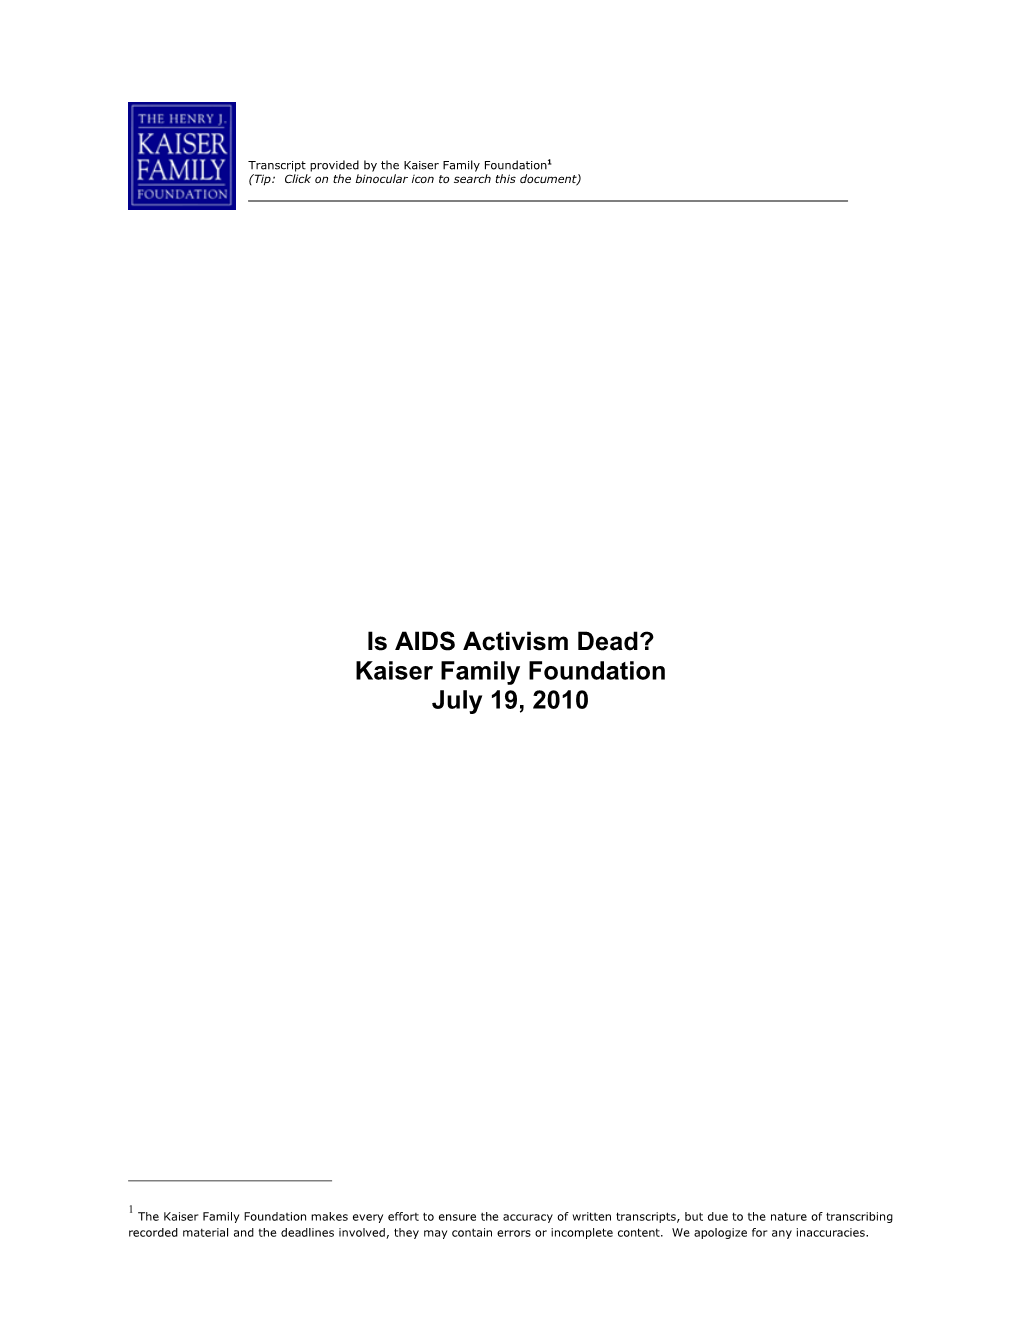 Is AIDS Activism Dead? Kaiser Family Foundation July 19, 2010